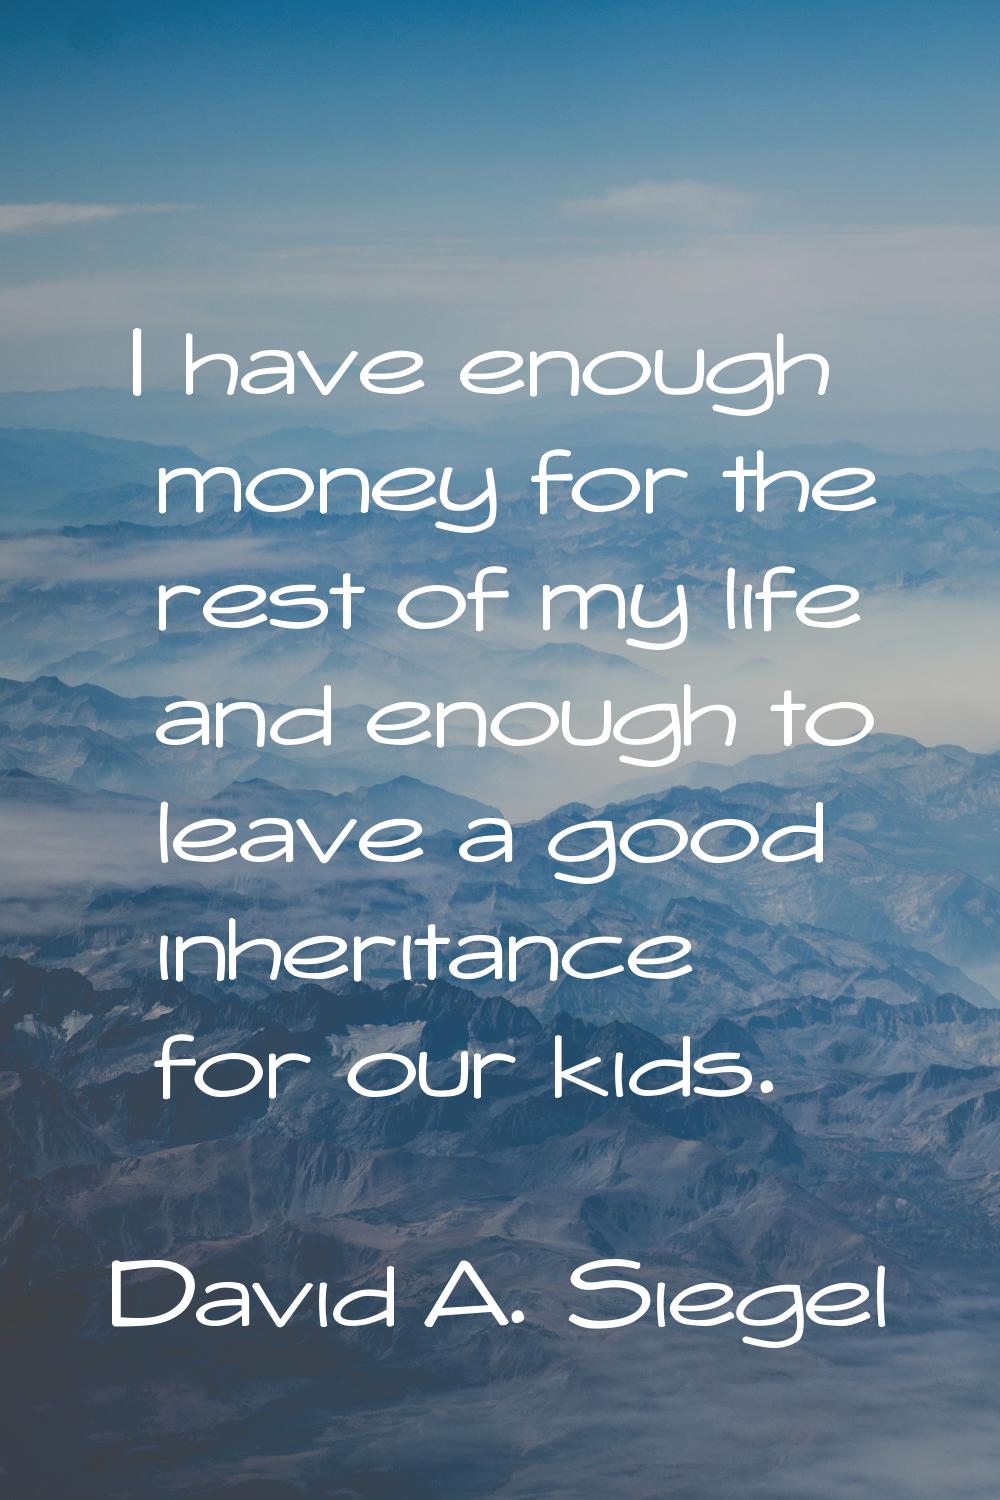 I have enough money for the rest of my life and enough to leave a good inheritance for our kids.